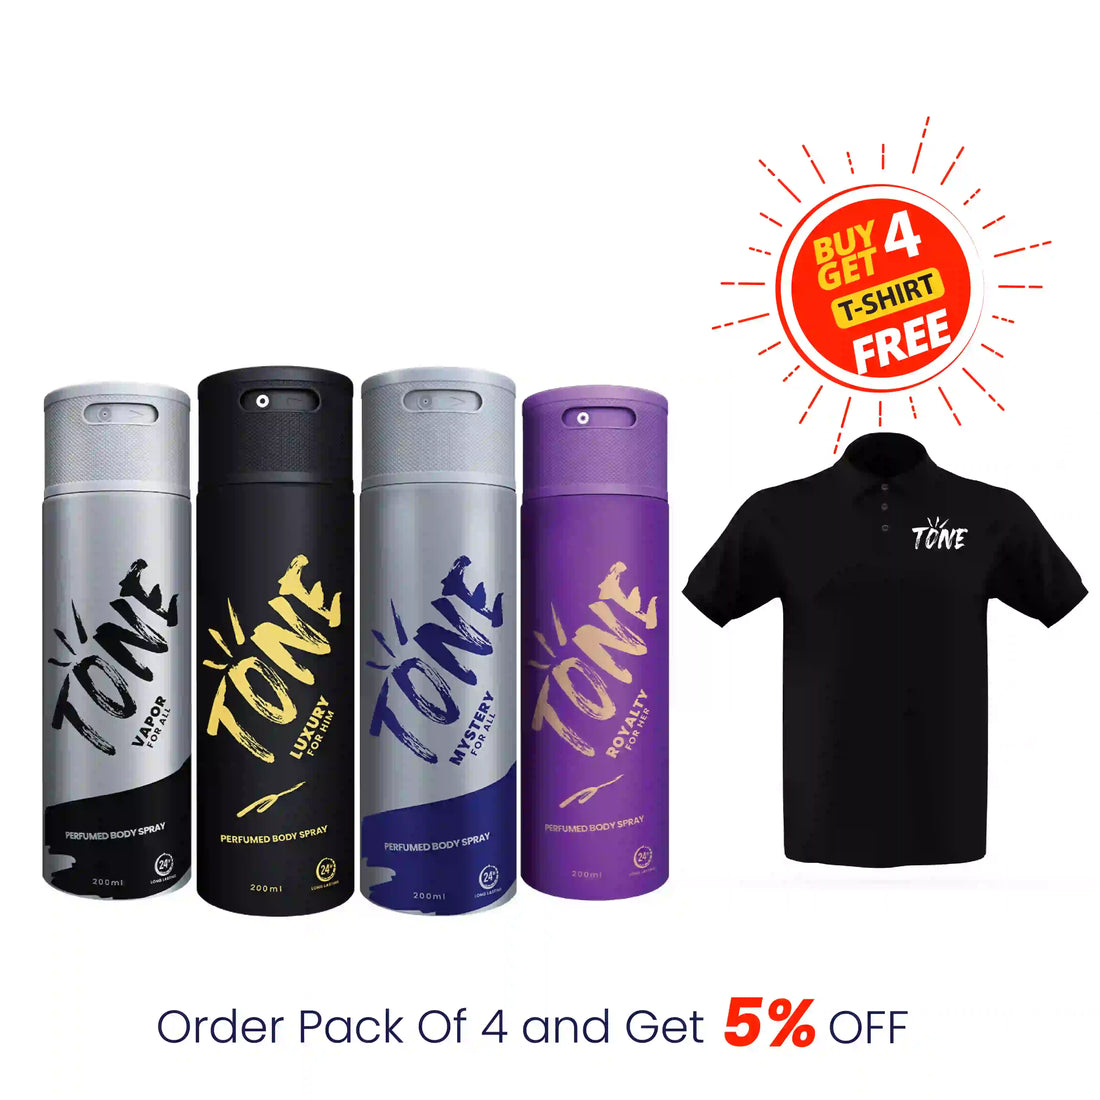 Pack of 4 (Vapor, Luxury, Mystery and Royalty) with free T-Shirt